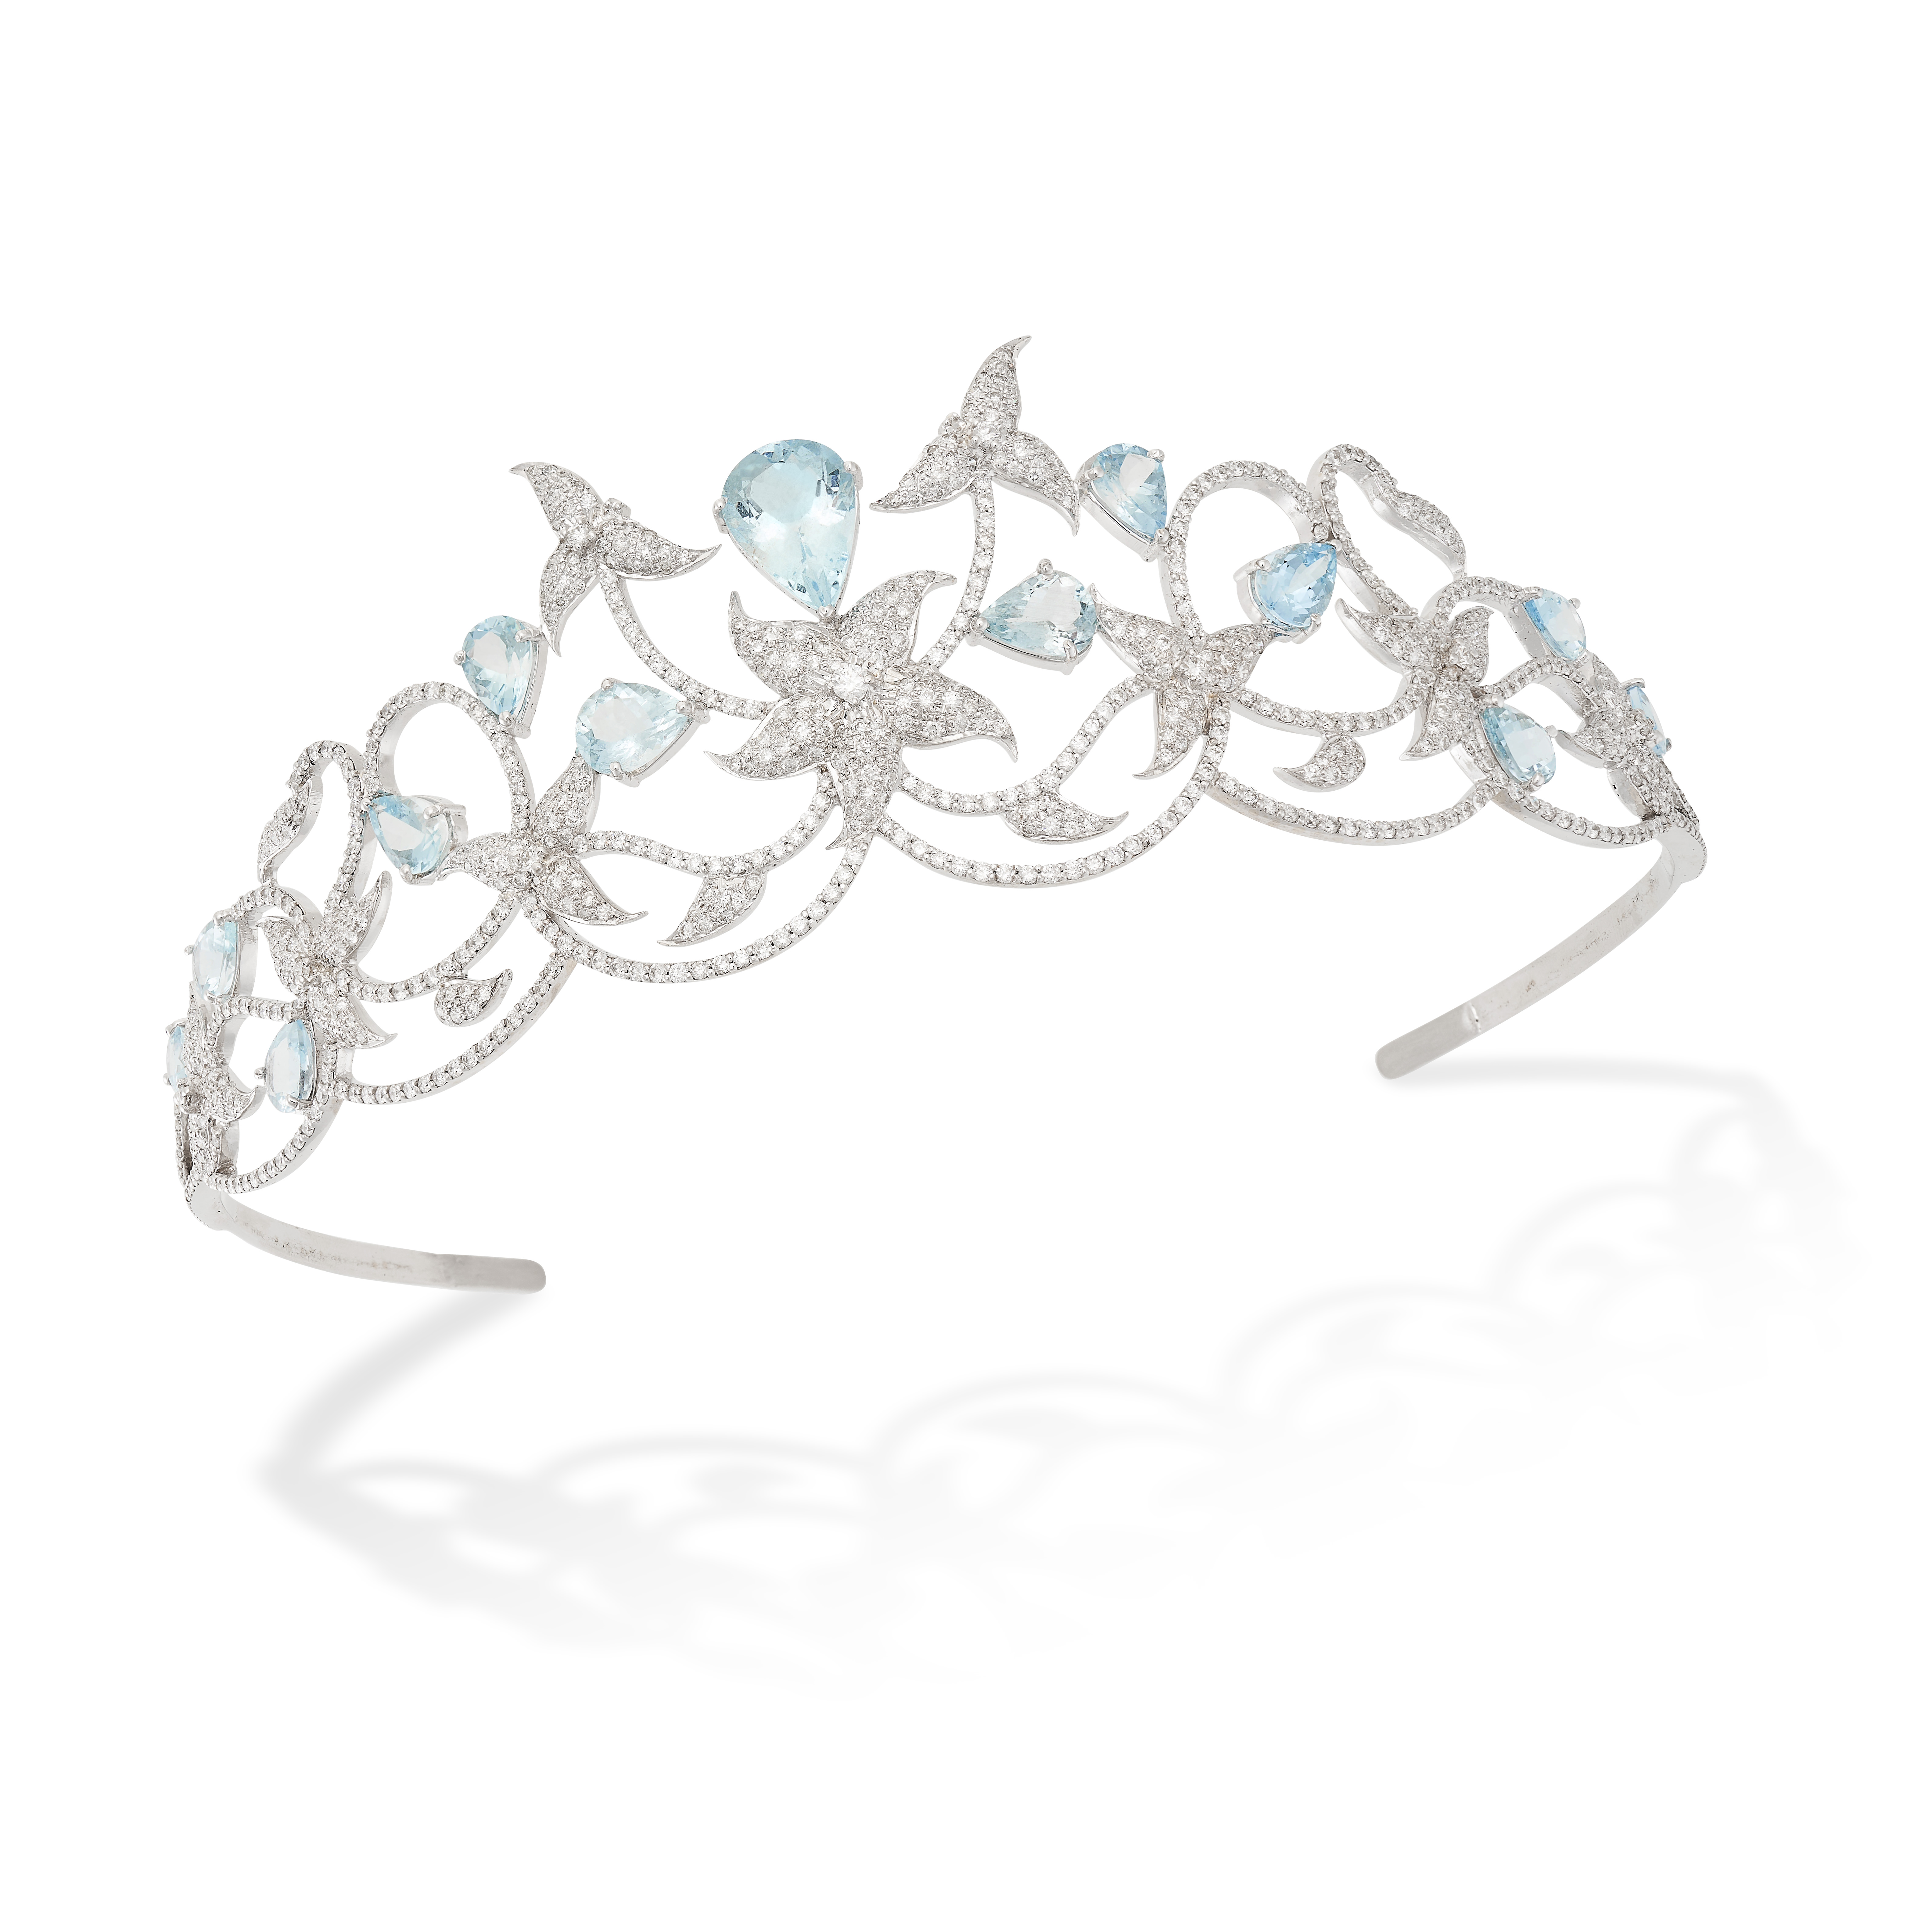 AN AQUAMARINE AND DIAMOND TIARA in 18ct white gold, in foliate design, set with pear shaped